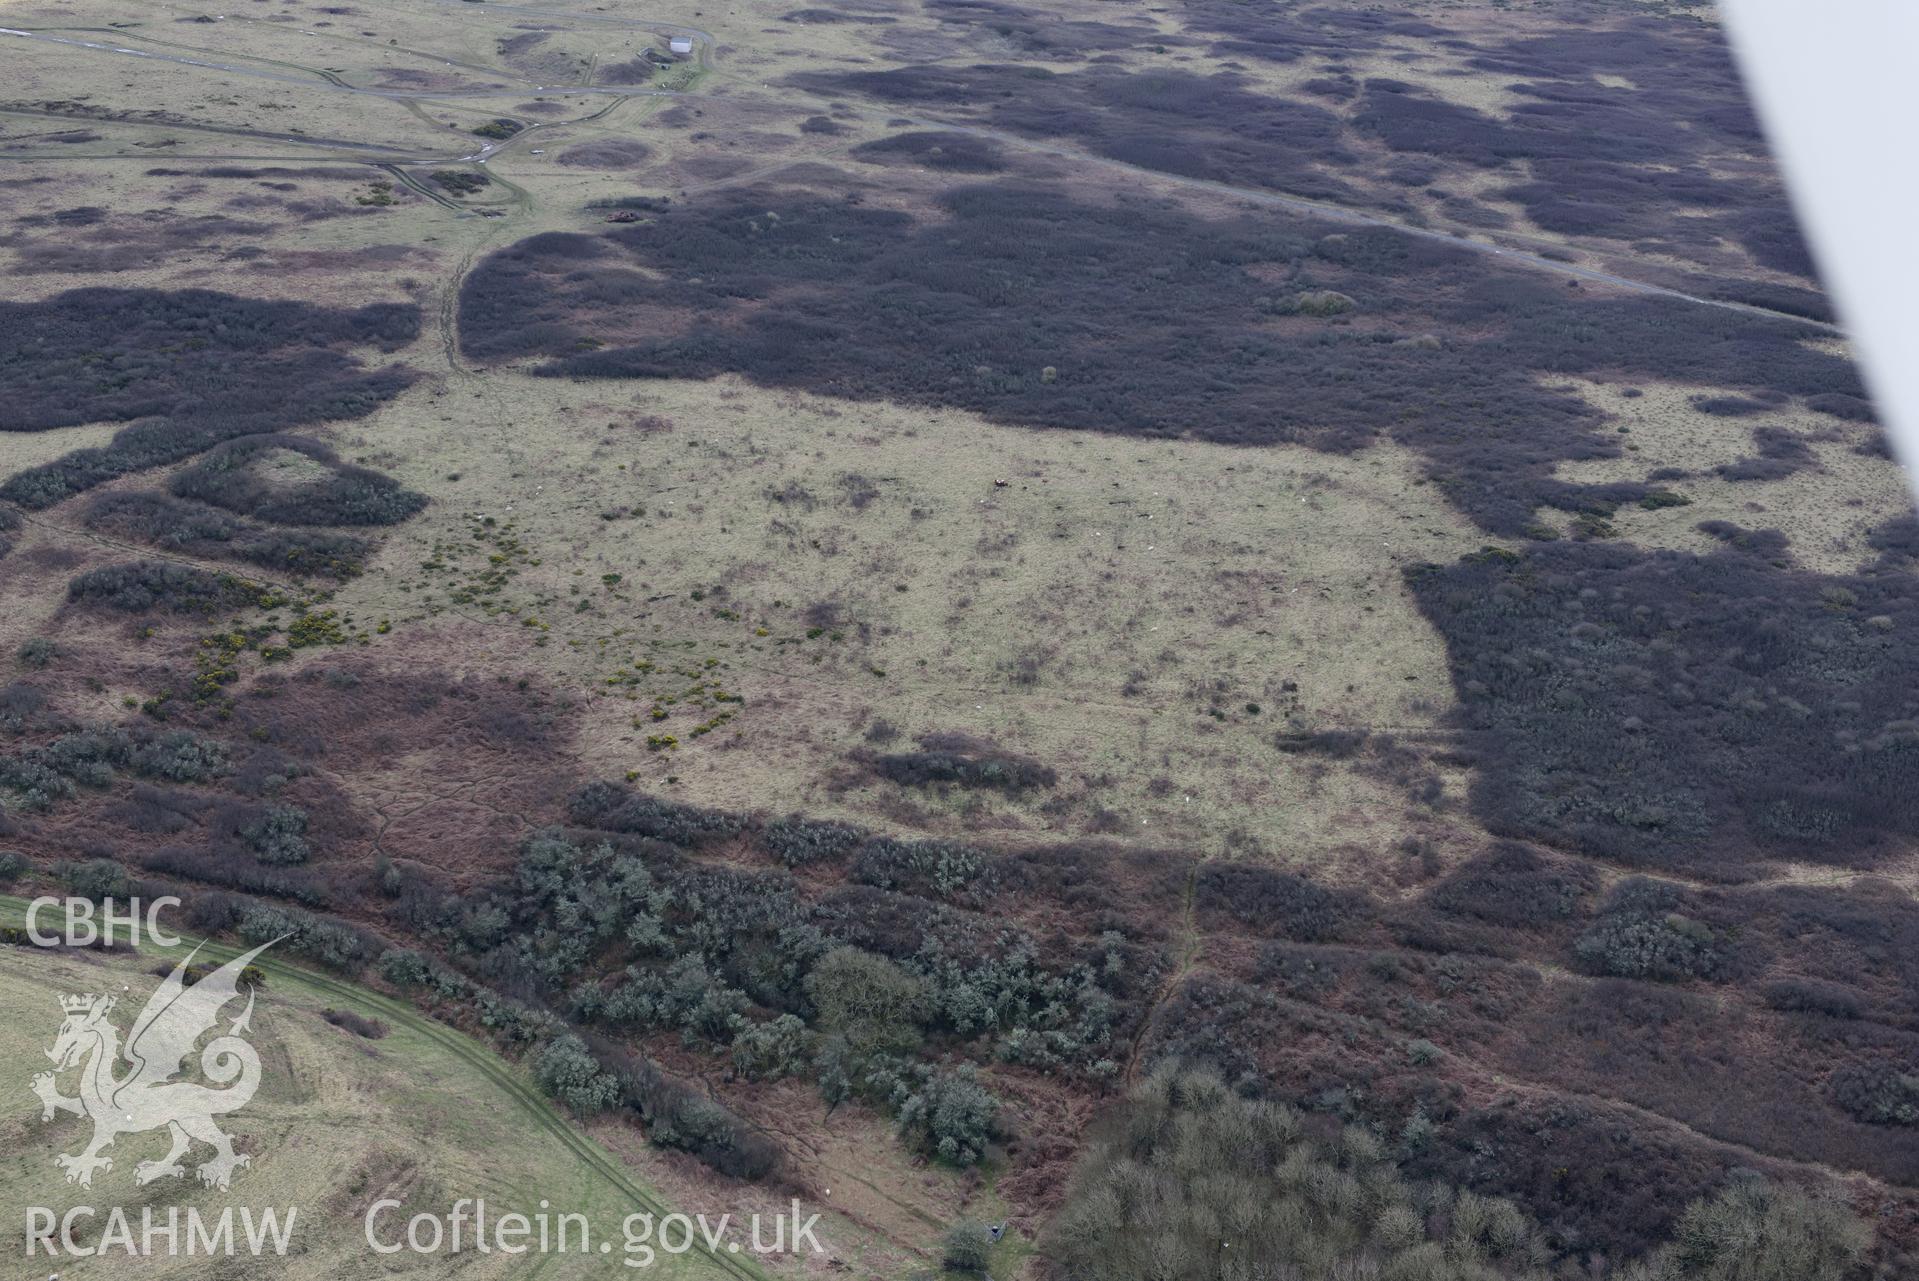 Warmans Hill. Baseline aerial reconnaissance survey for the CHERISH Project. ? Crown: CHERISH PROJECT 2018. Produced with EU funds through the Ireland Wales Co-operation Programme 2014-2020. All material made freely available through the Open Government Licence.